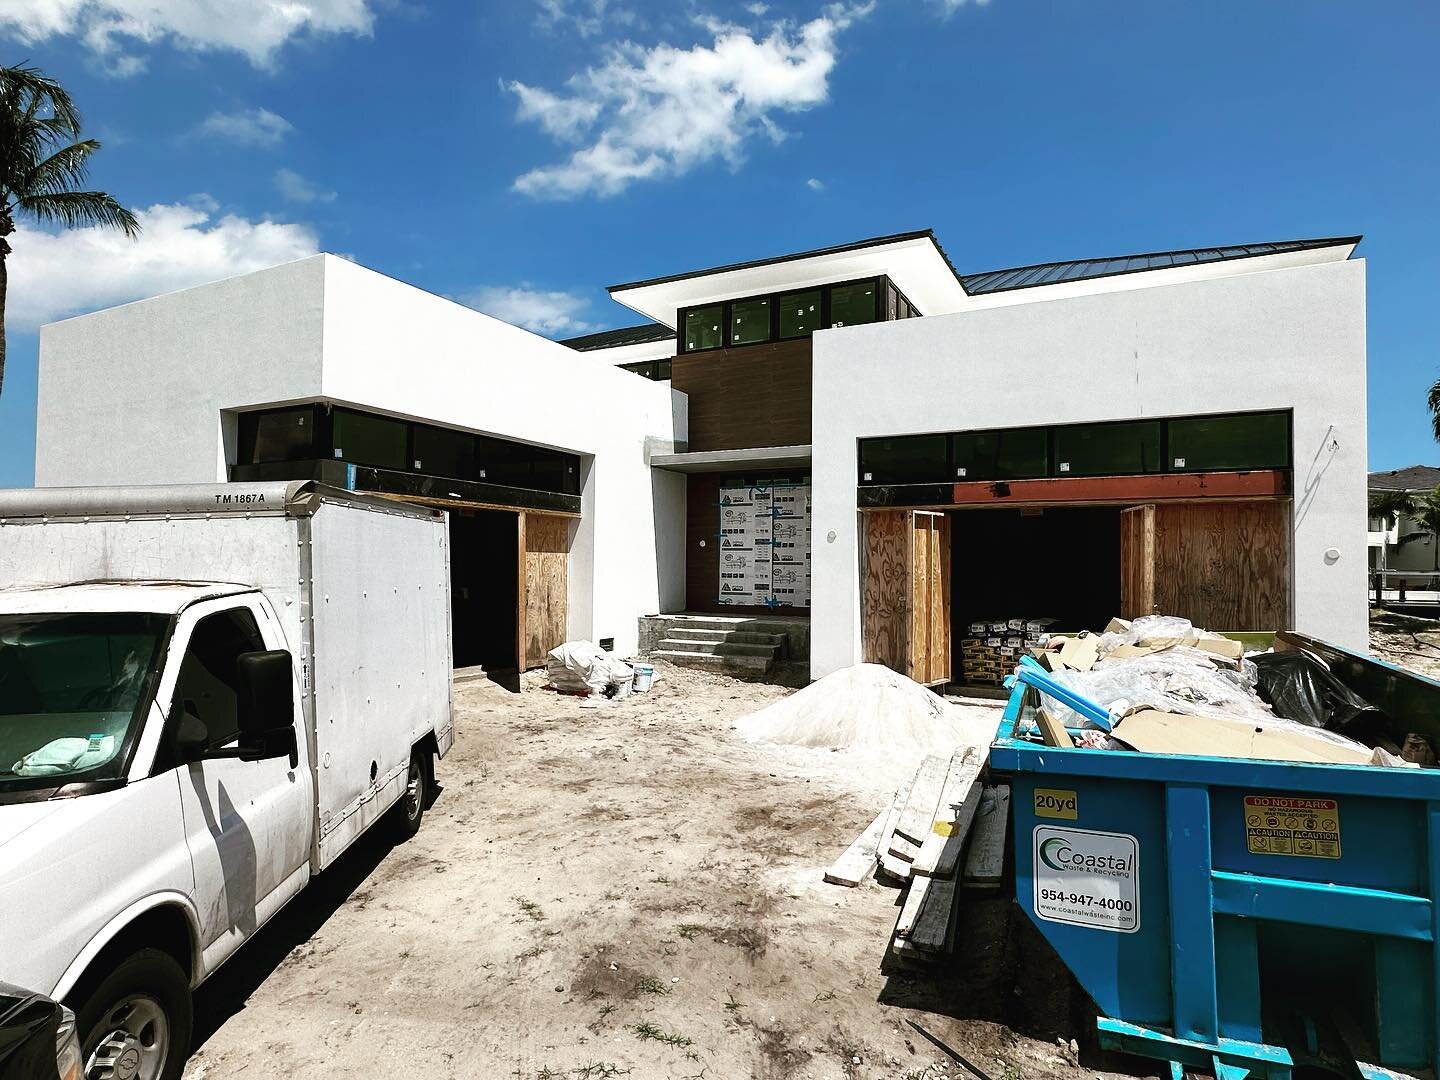 Oooh, she&rsquo;s coming along quite nicely!! Loving the cool contemporary look on the outside. Inside will also be just as beautiful! @marcjulienhomes @borrero_architecture #interiordesign #southfloridaarchitecture #southflorida #floridadesign #sout